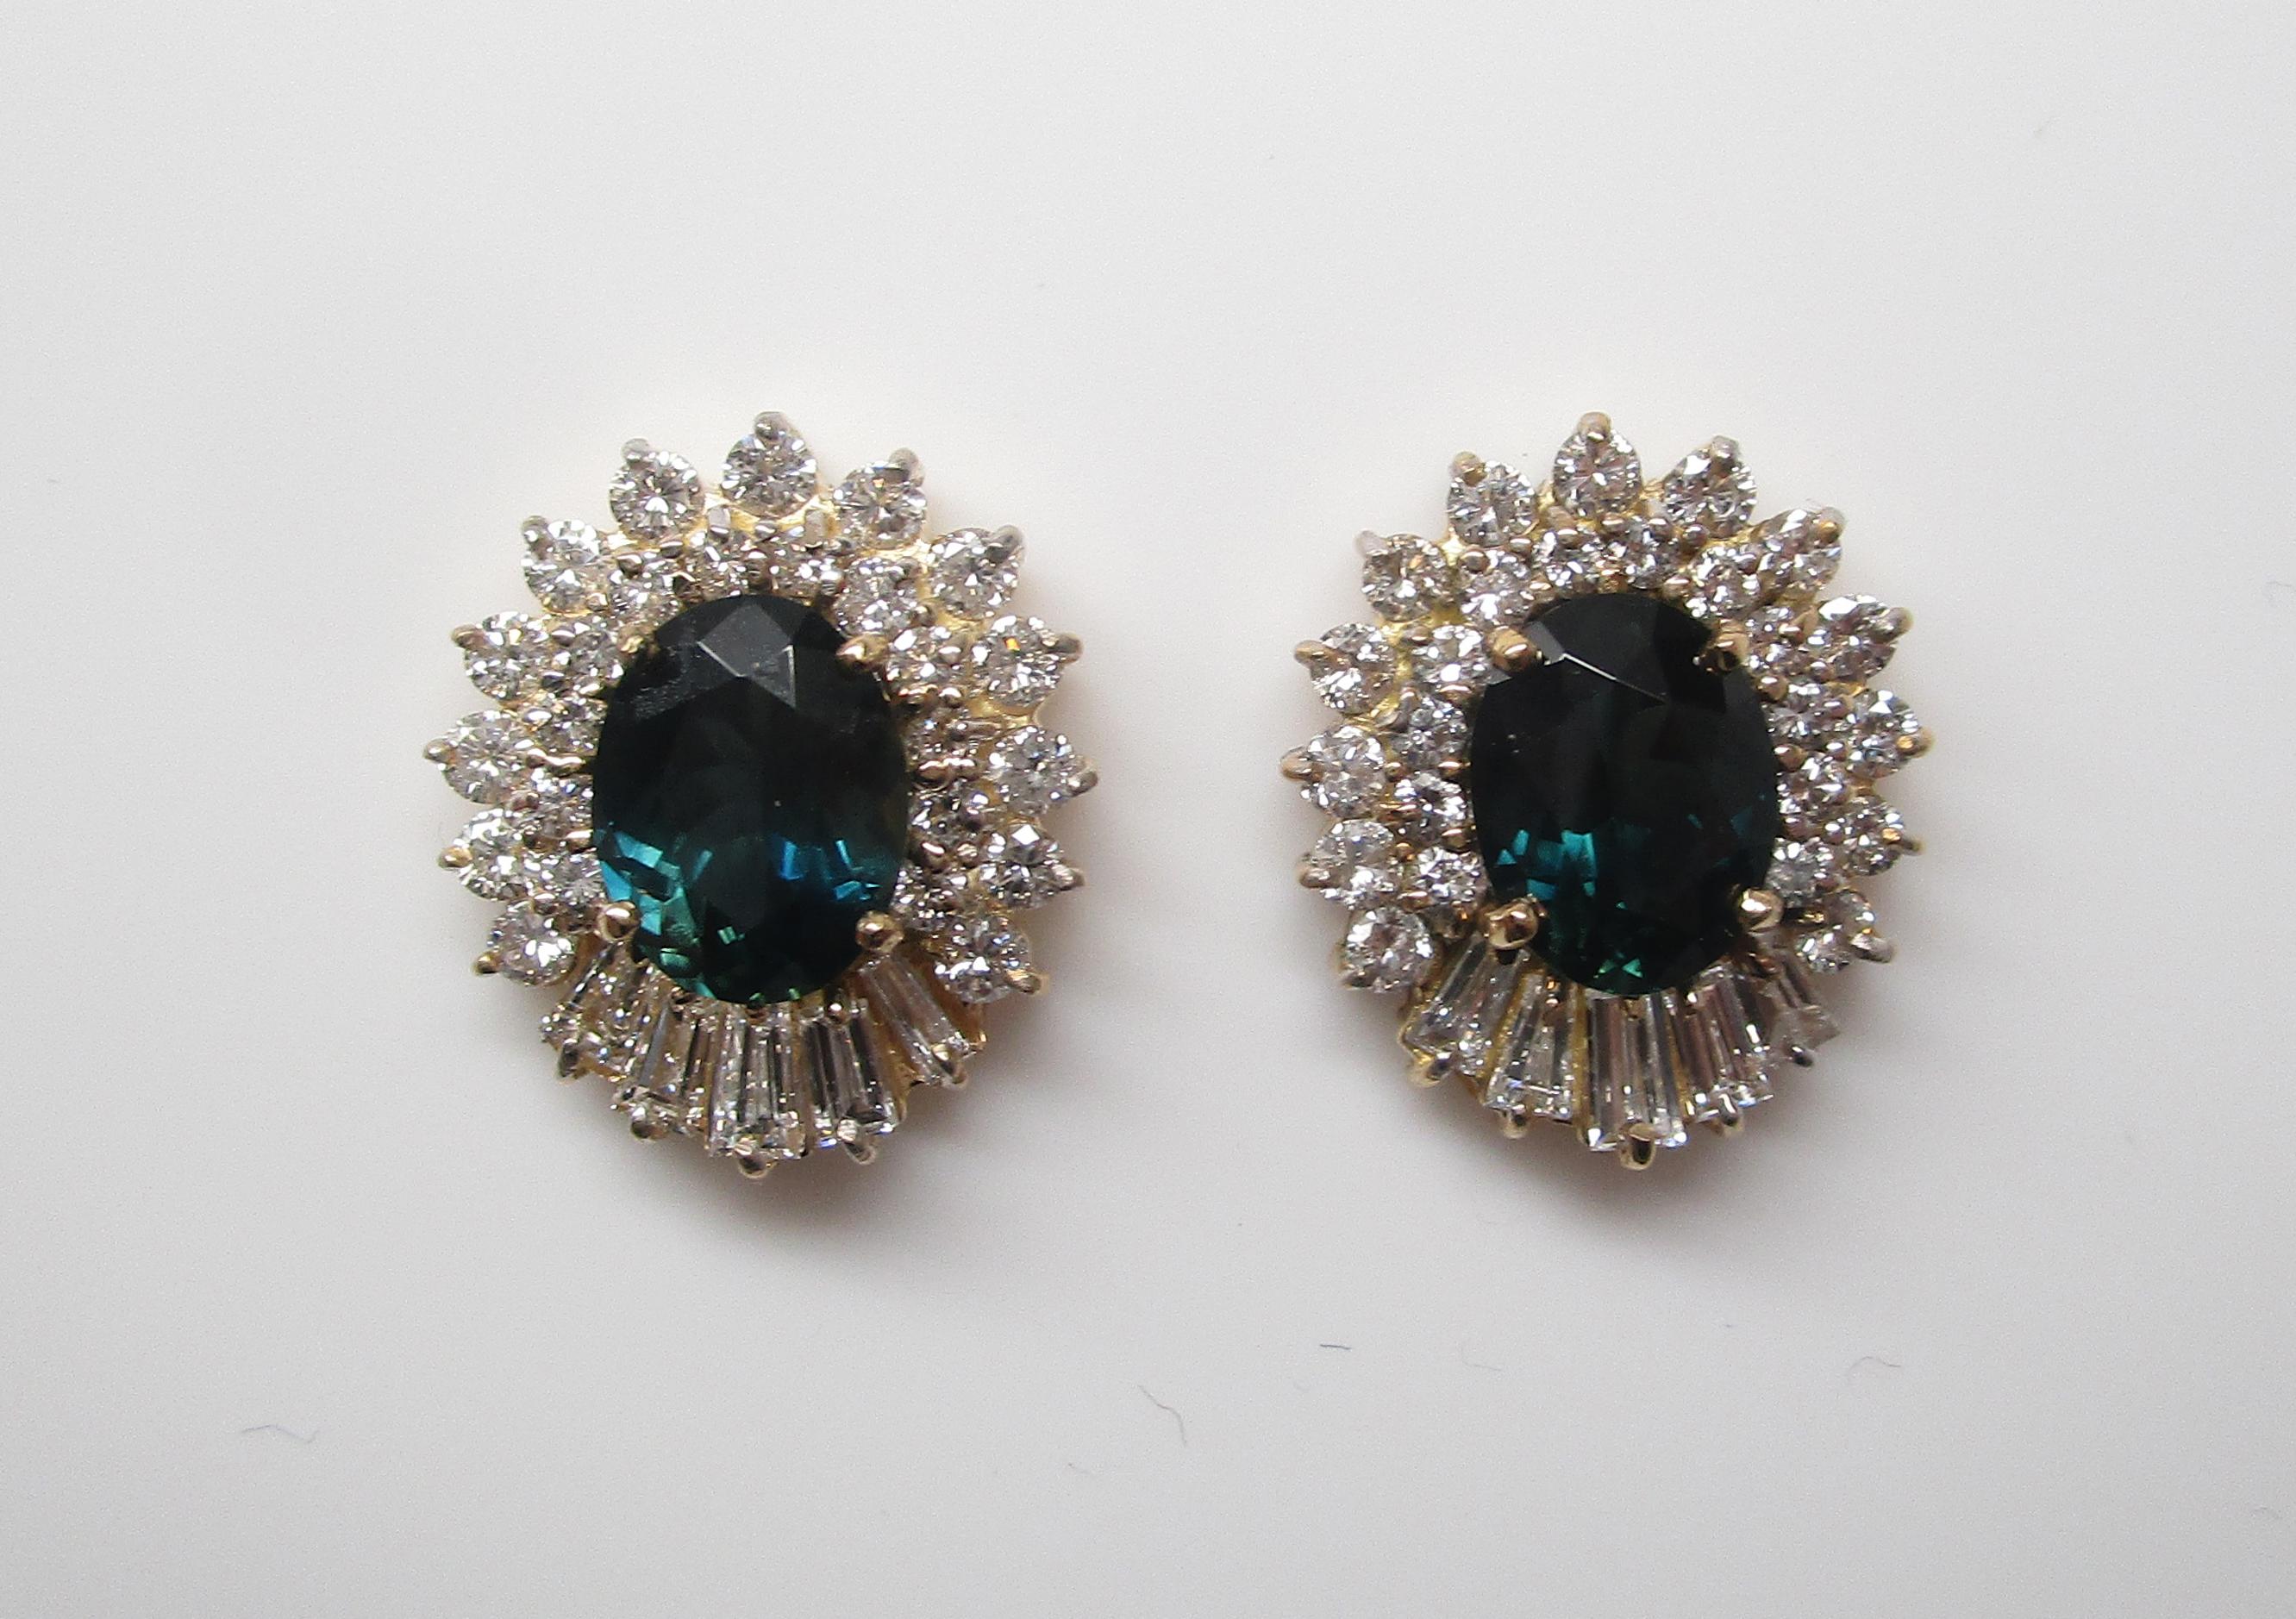 These amazing midcentury earrings are in 14k yellow gold and have diamond frames surrounding some of the most remarkable colored stones you’ll ever see - natural color-change sapphires! These incredible sapphires show up dark blue, and change to